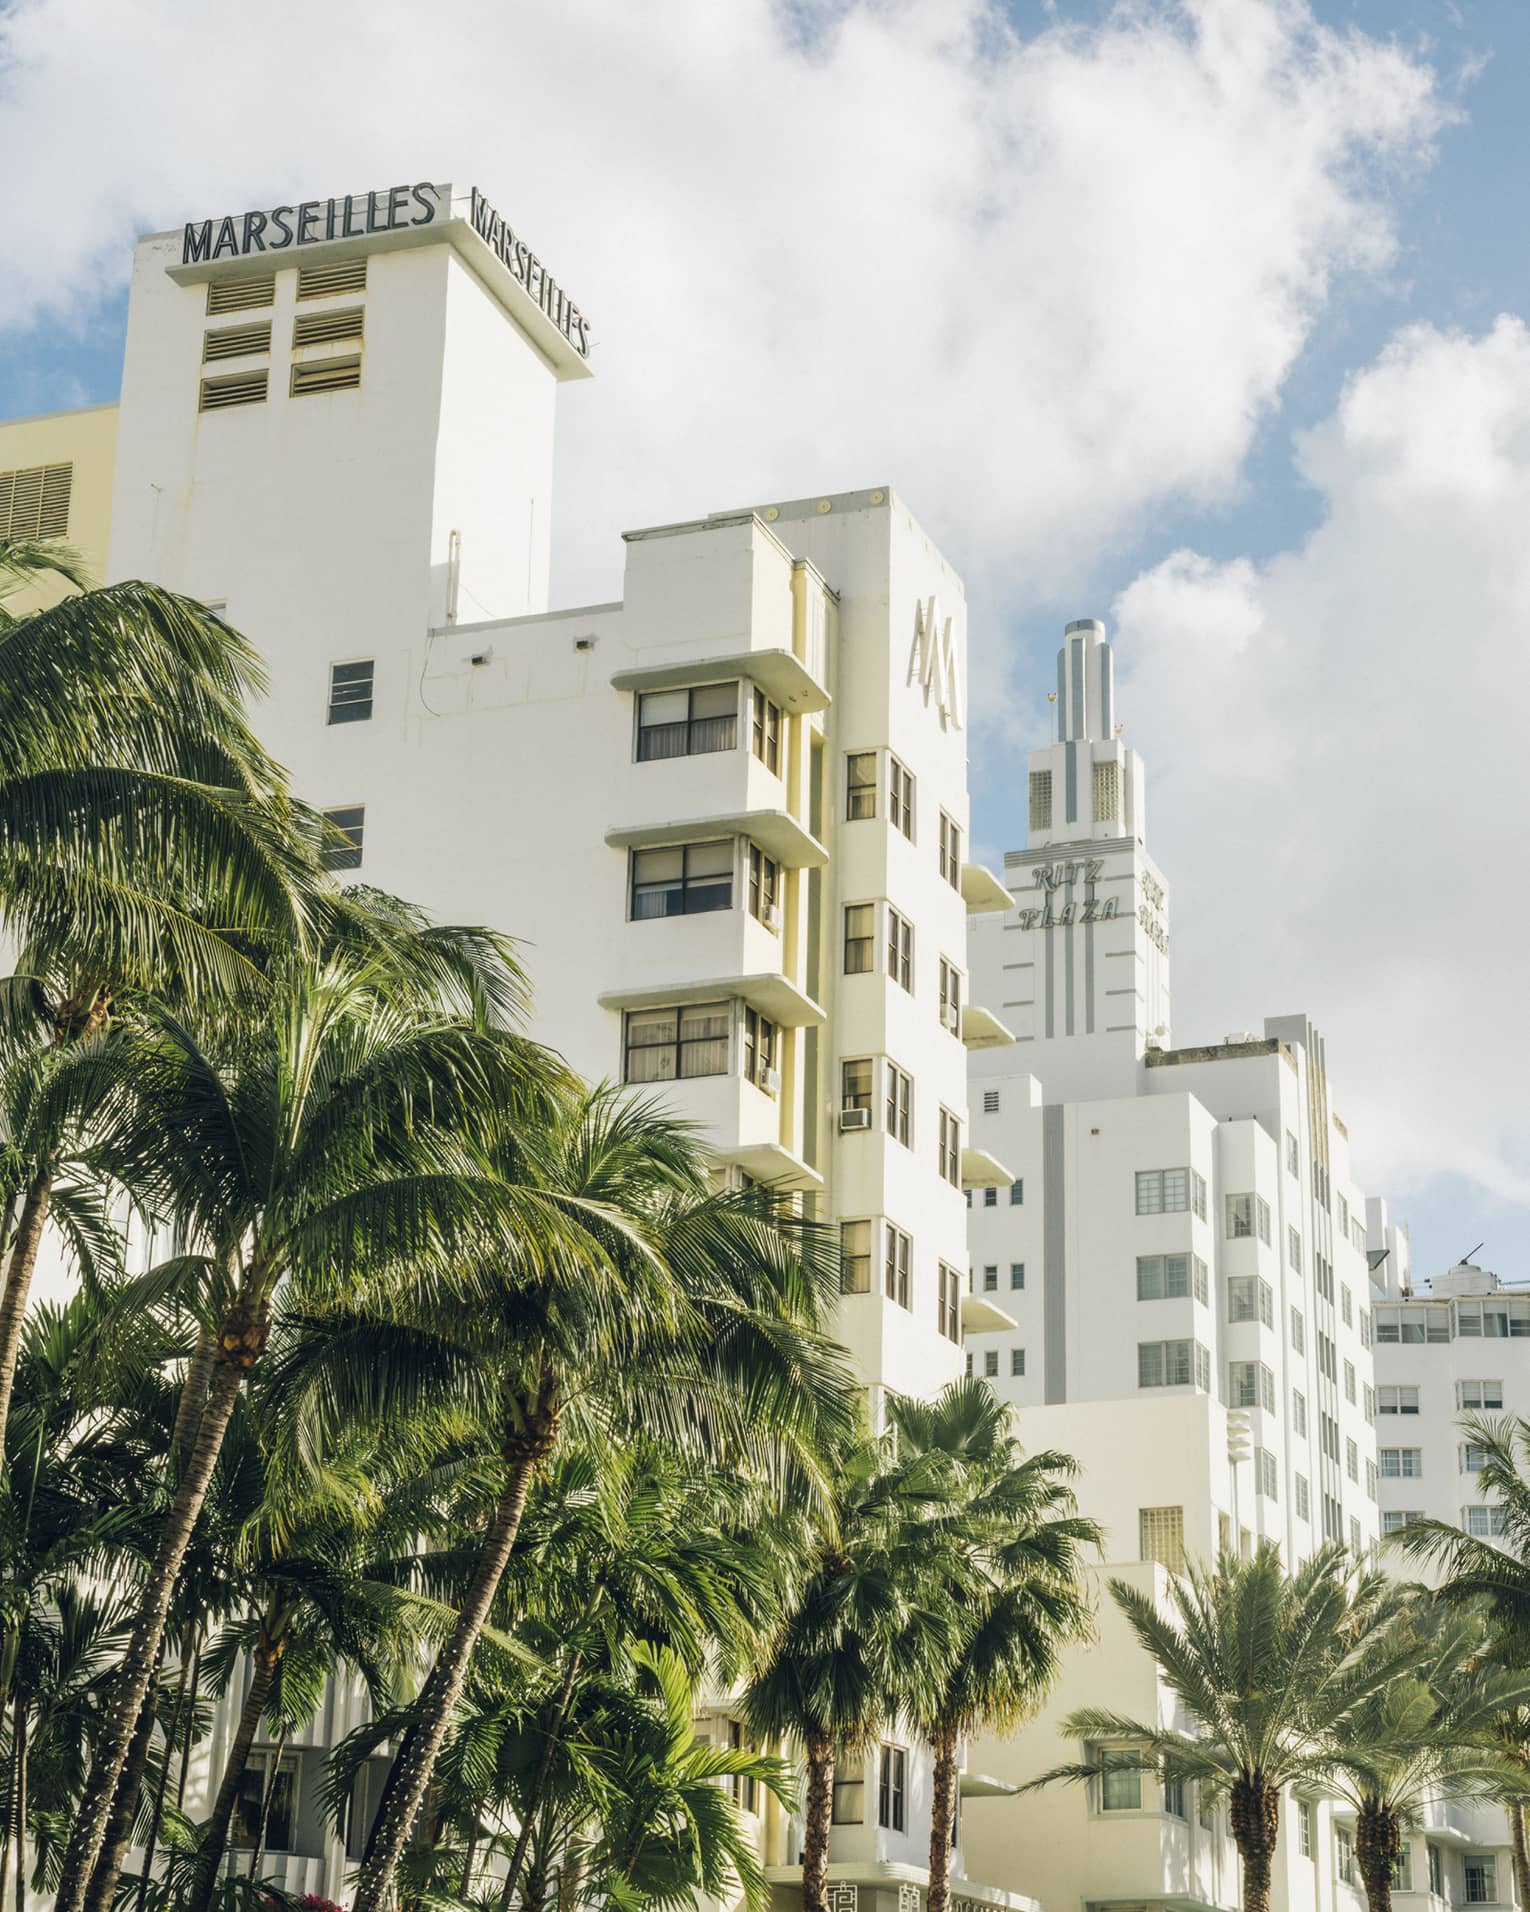 Several hotels in Art Deco buildings are landscaped with palm trees on Collins Avenue.